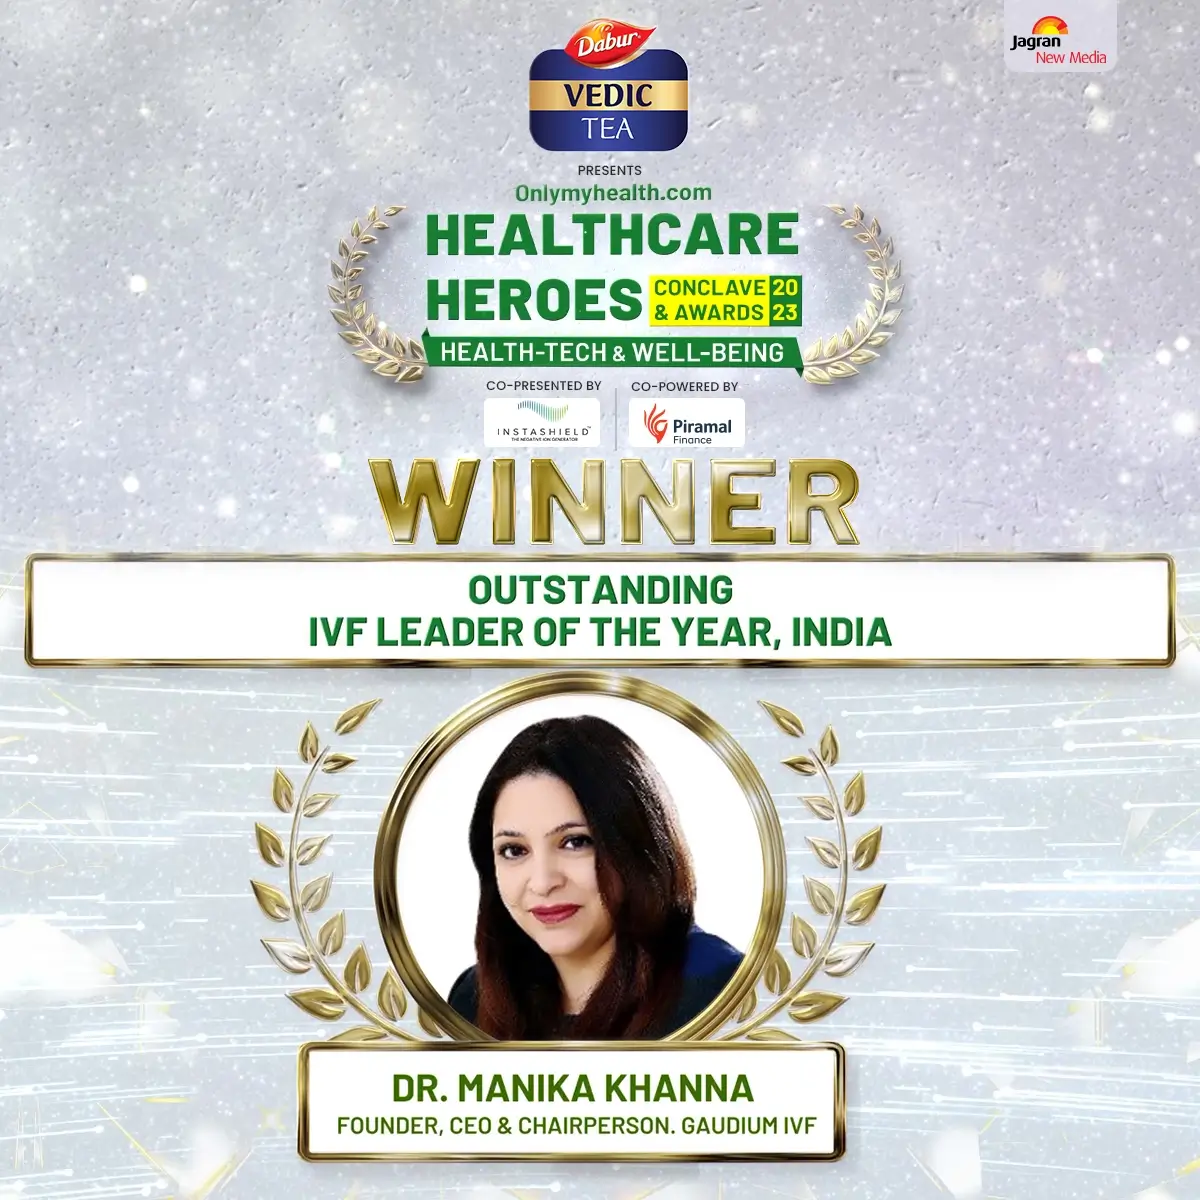 IVF Leader of the Year India